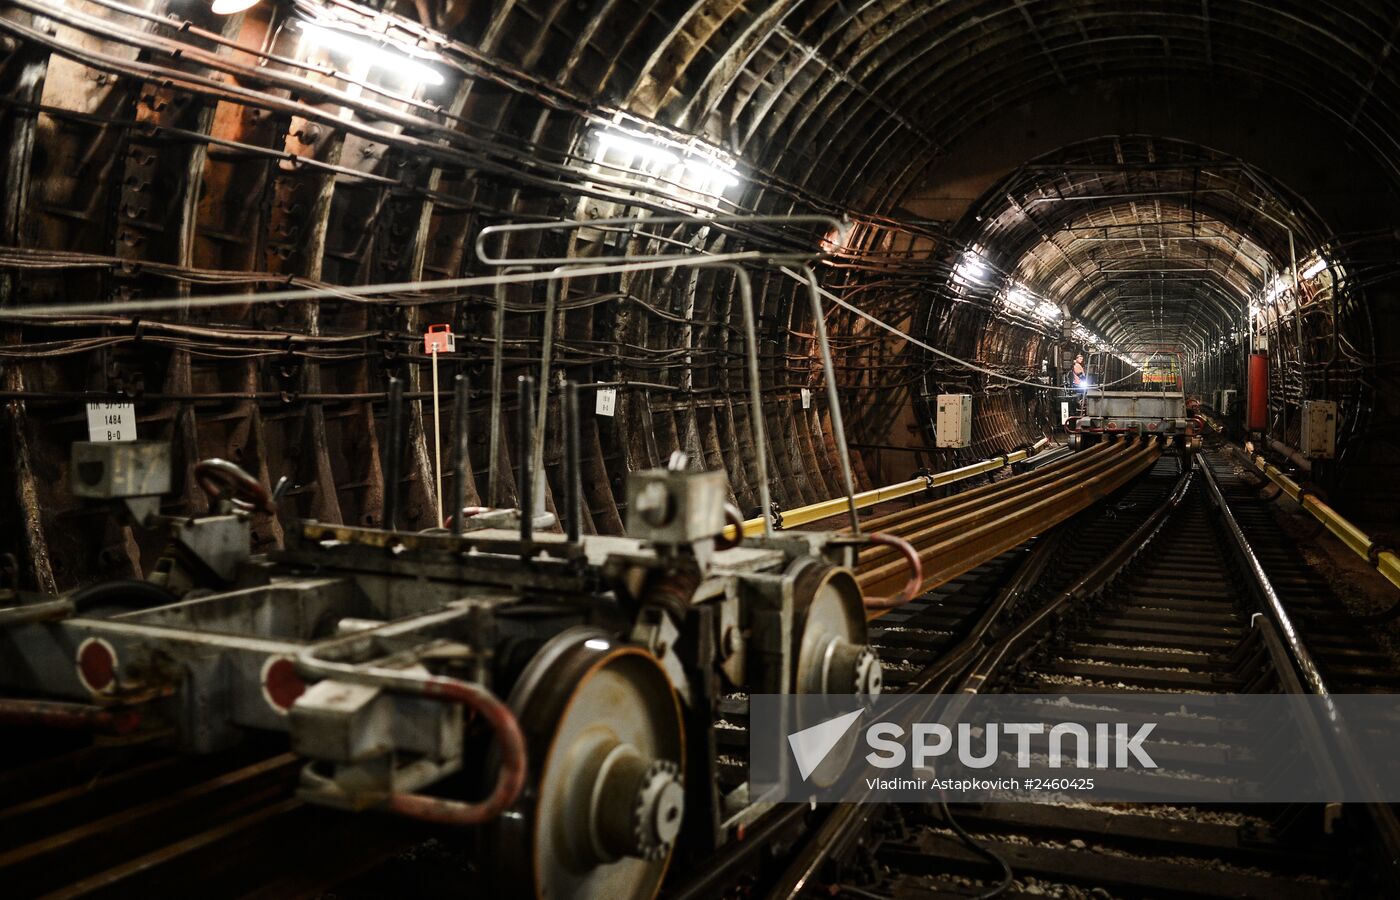 Night-time routine maintenance at Moscow metro